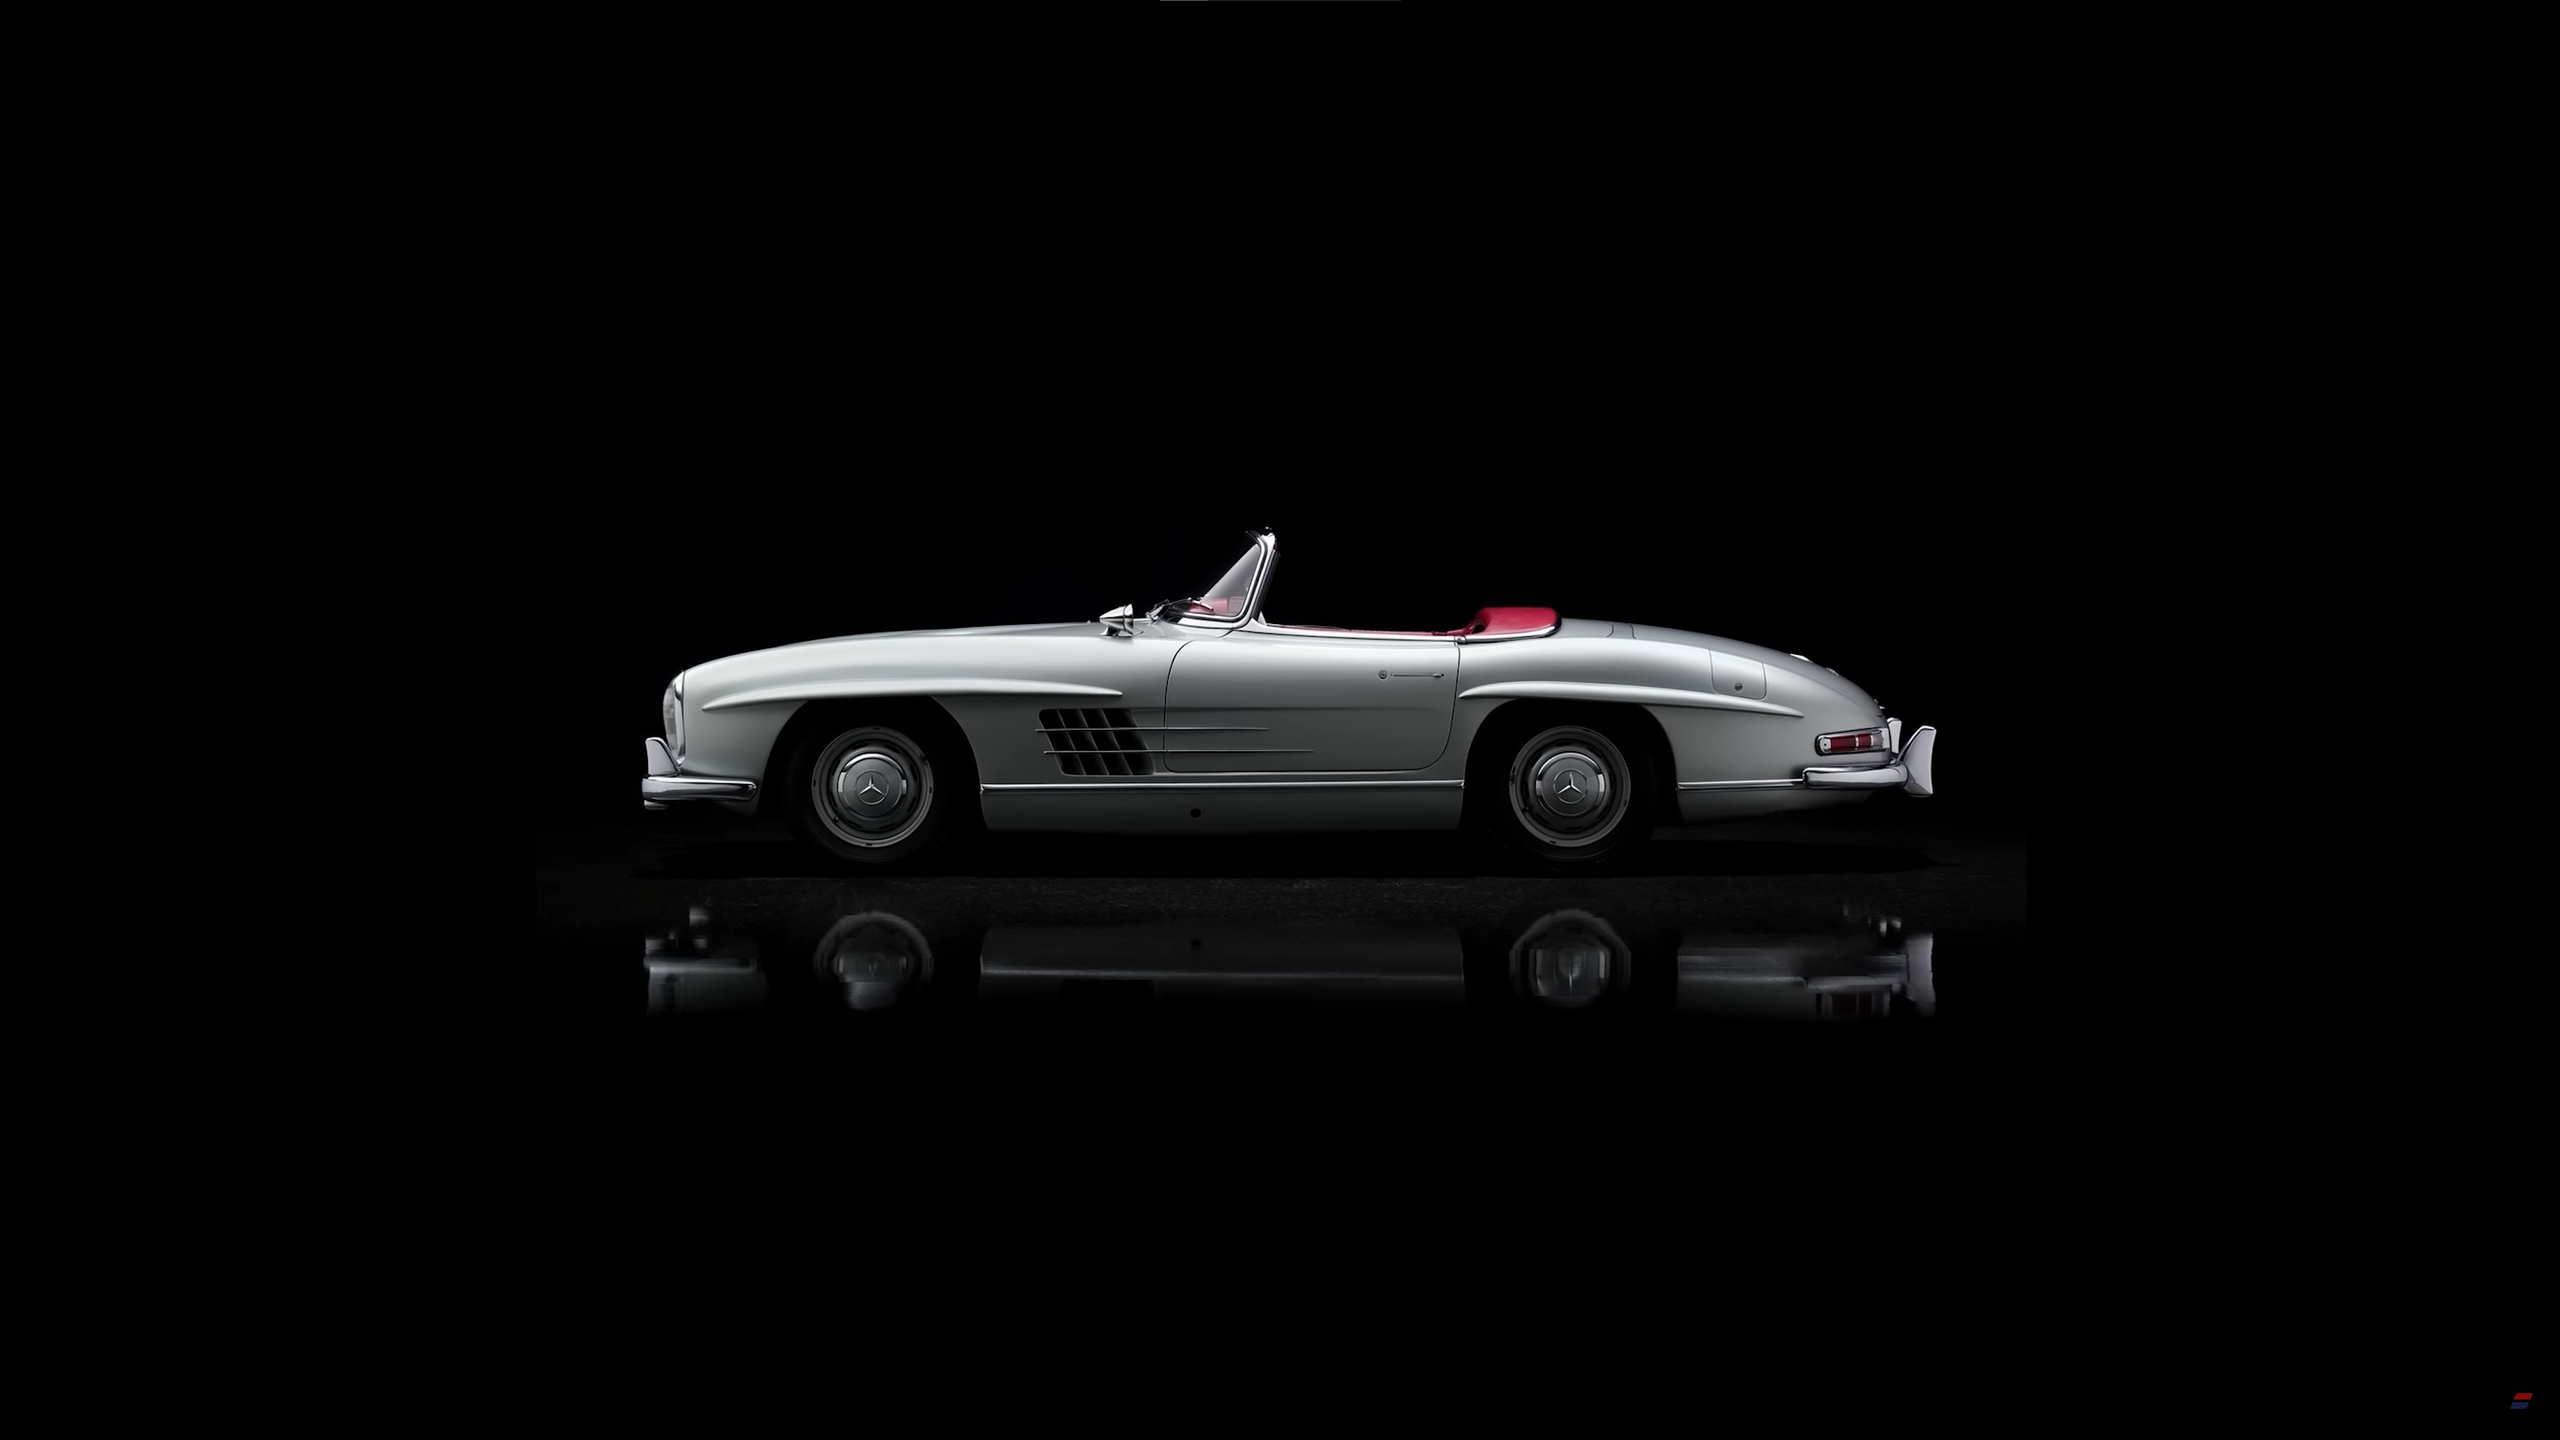 General 2560x1440 Mercedes-Benz SL car vehicle black background silver Roadster side view reflection simple background minimalism convertible German cars